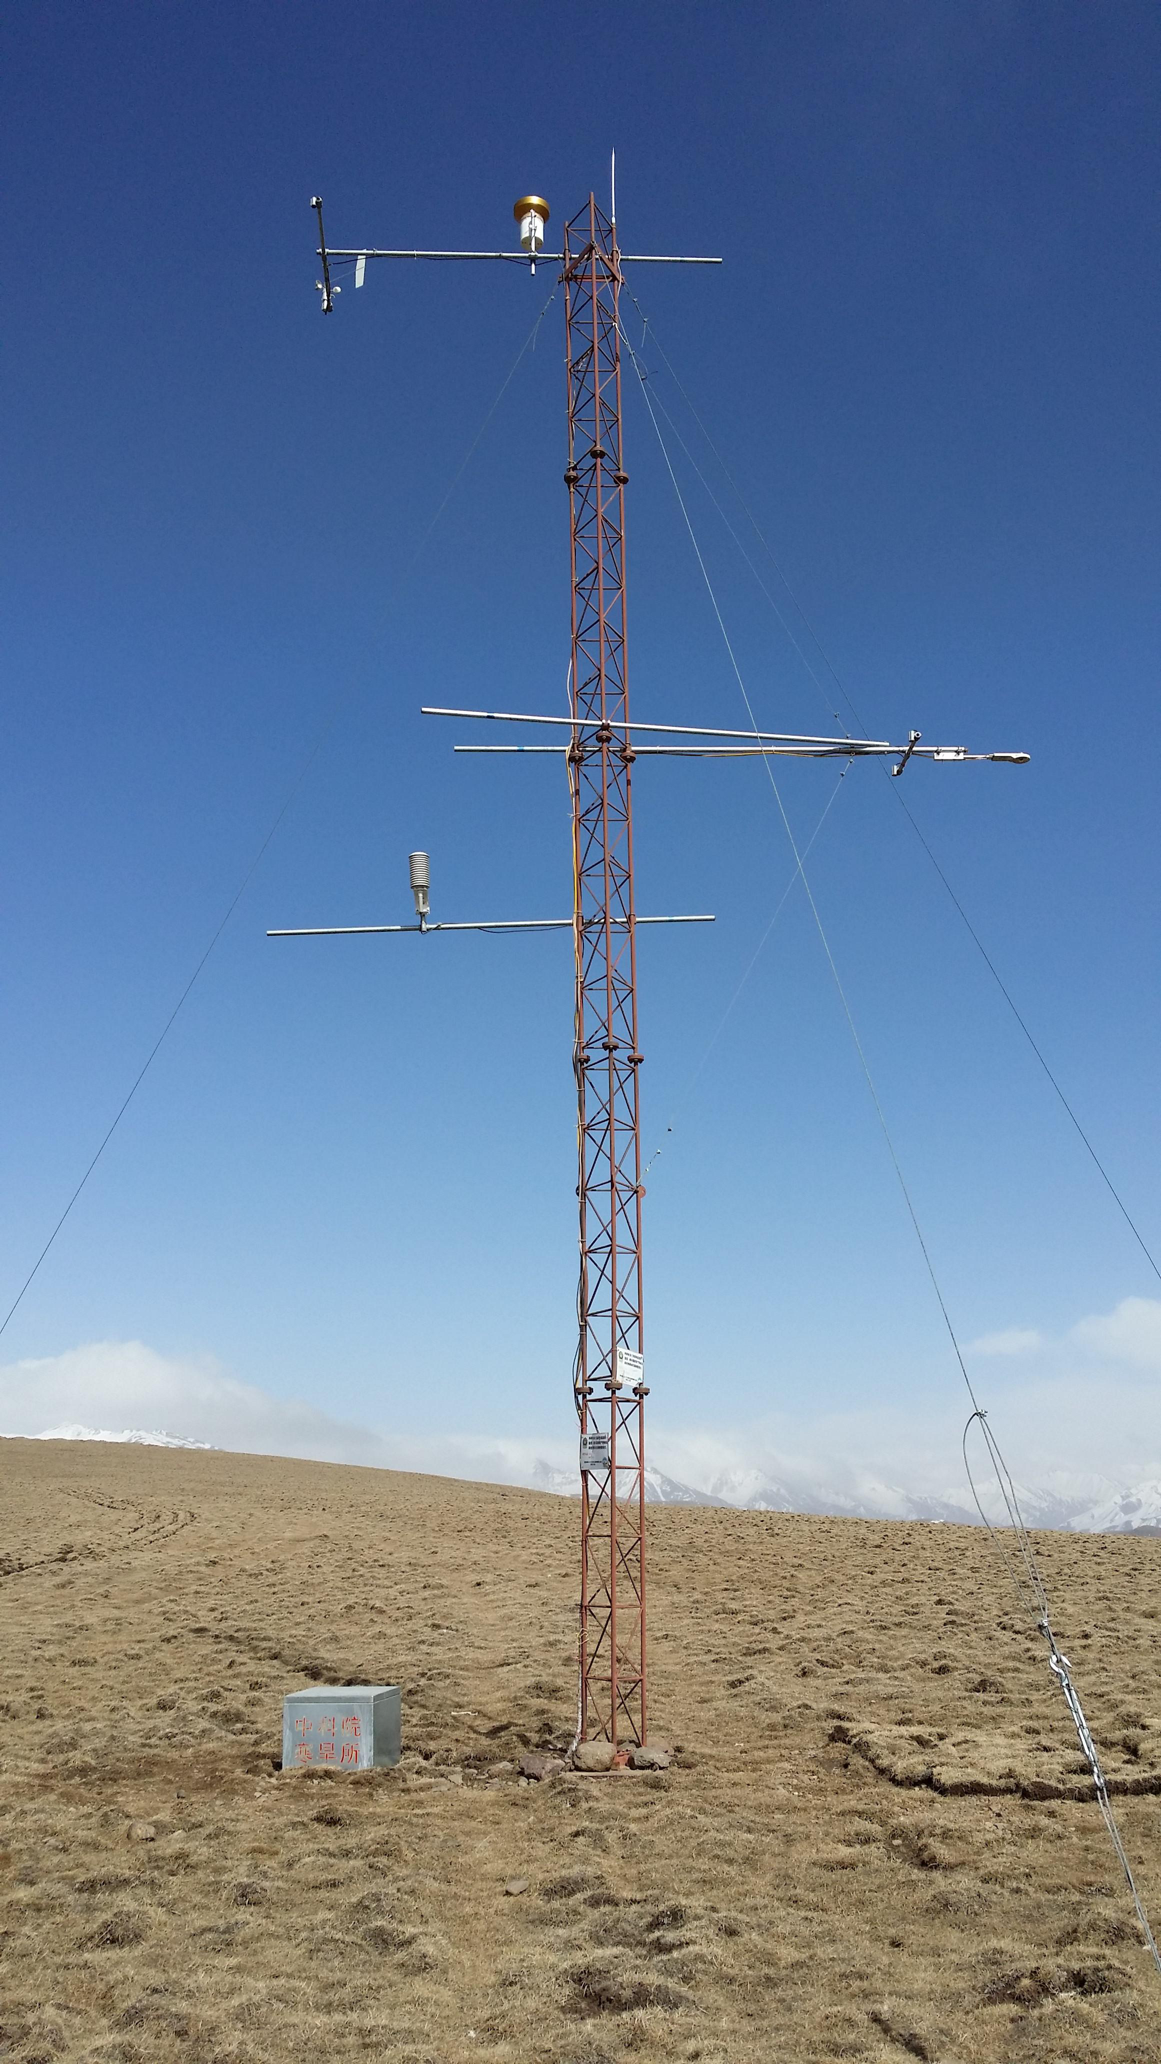 Qilian Mountains integrated observatory network: Dataset of Heihe integrated observatory network (automatic weather station of Jingyangling station, 2019)